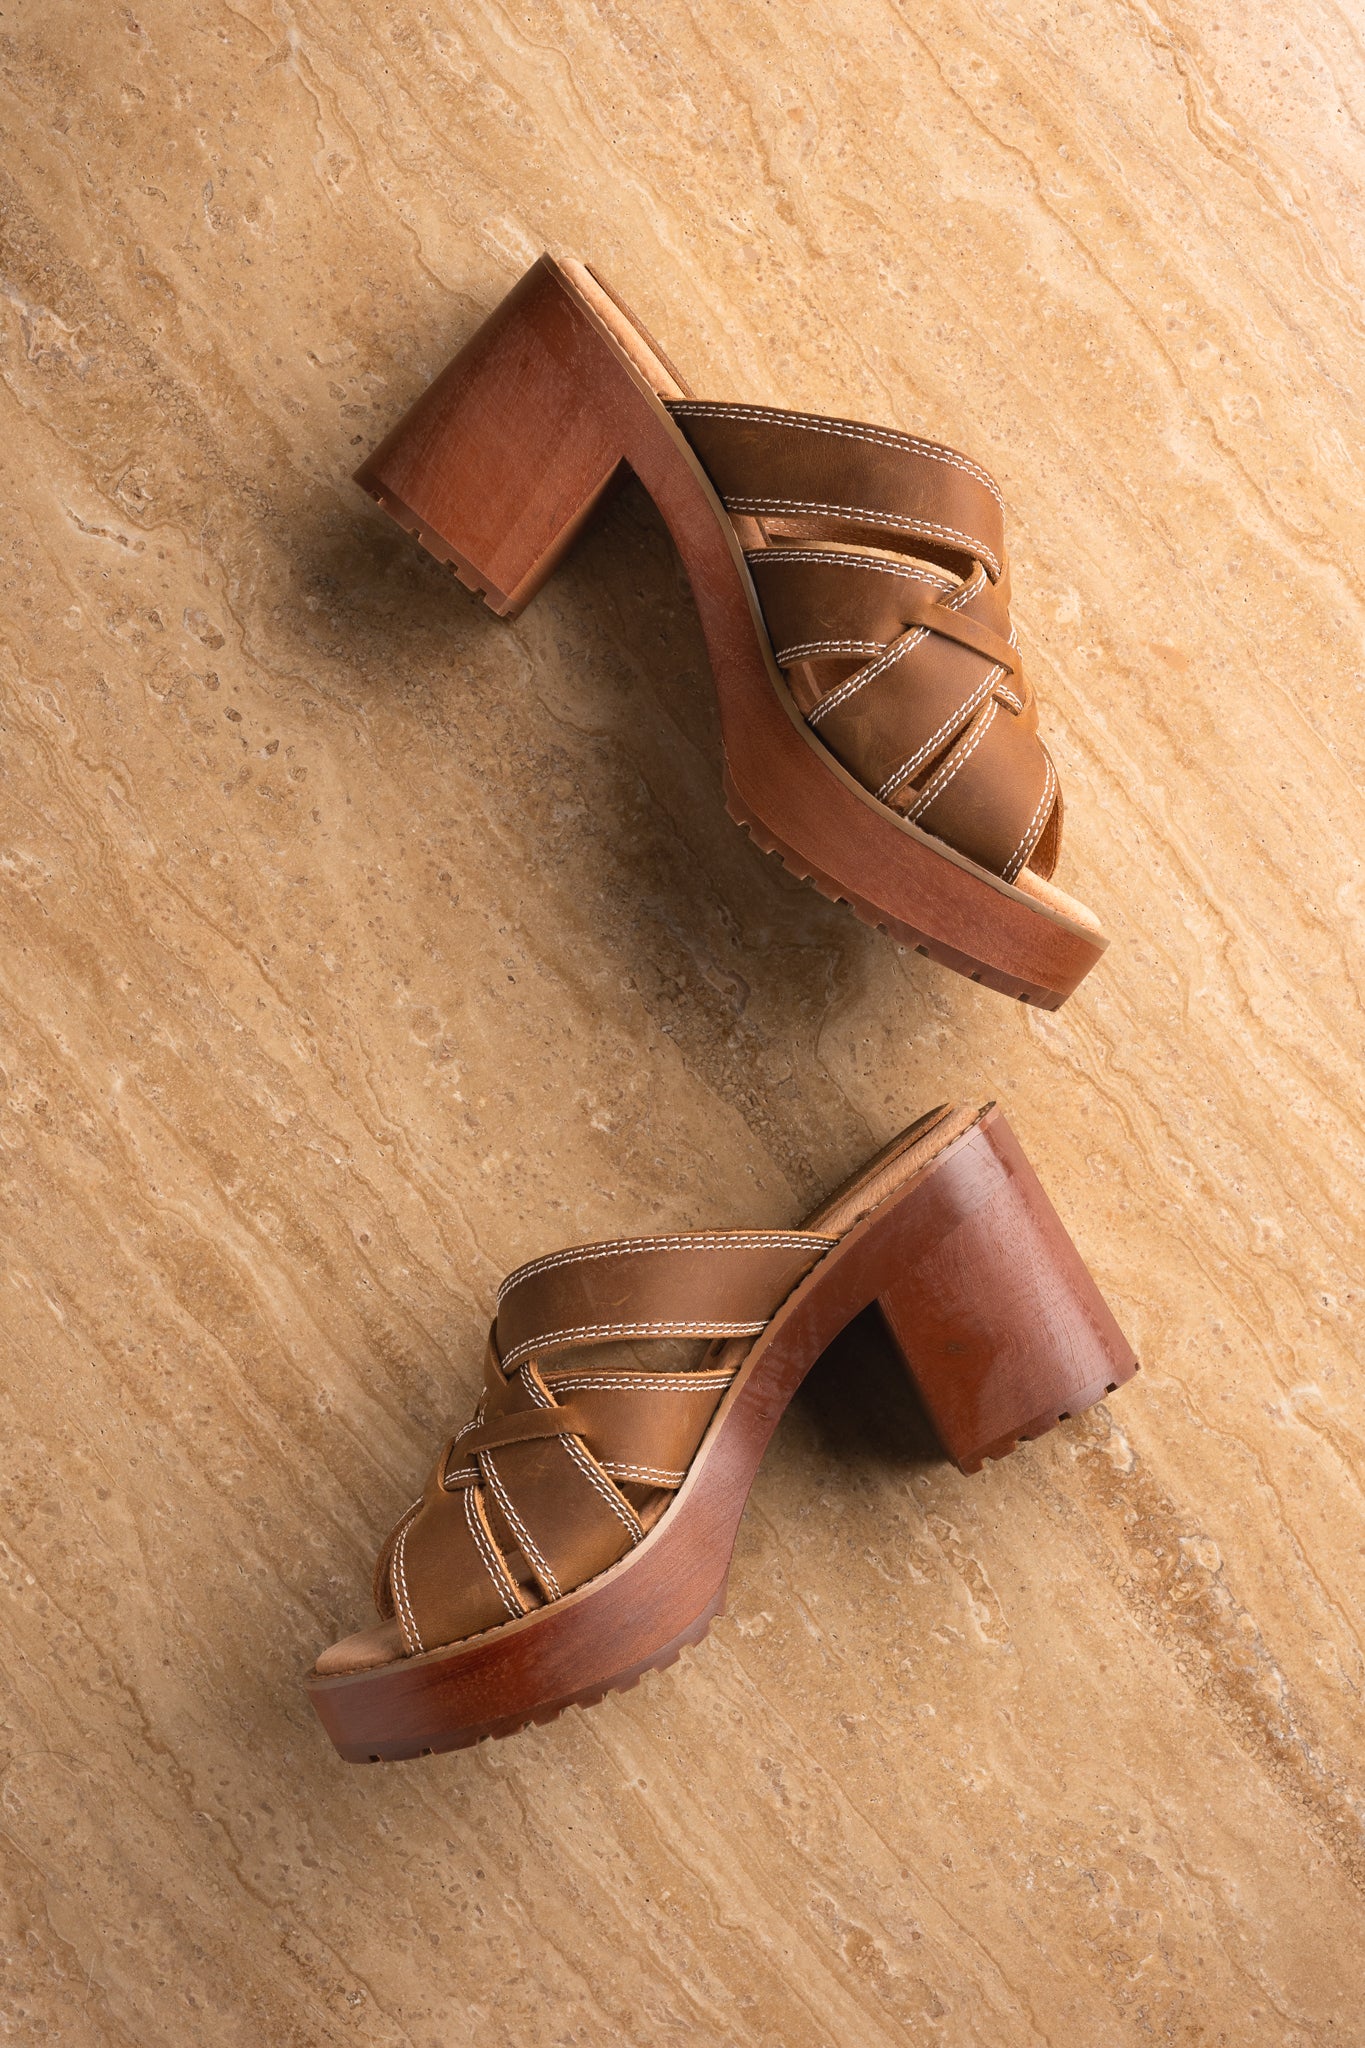 Norwood Suede Heeled Sandals in Chocolate